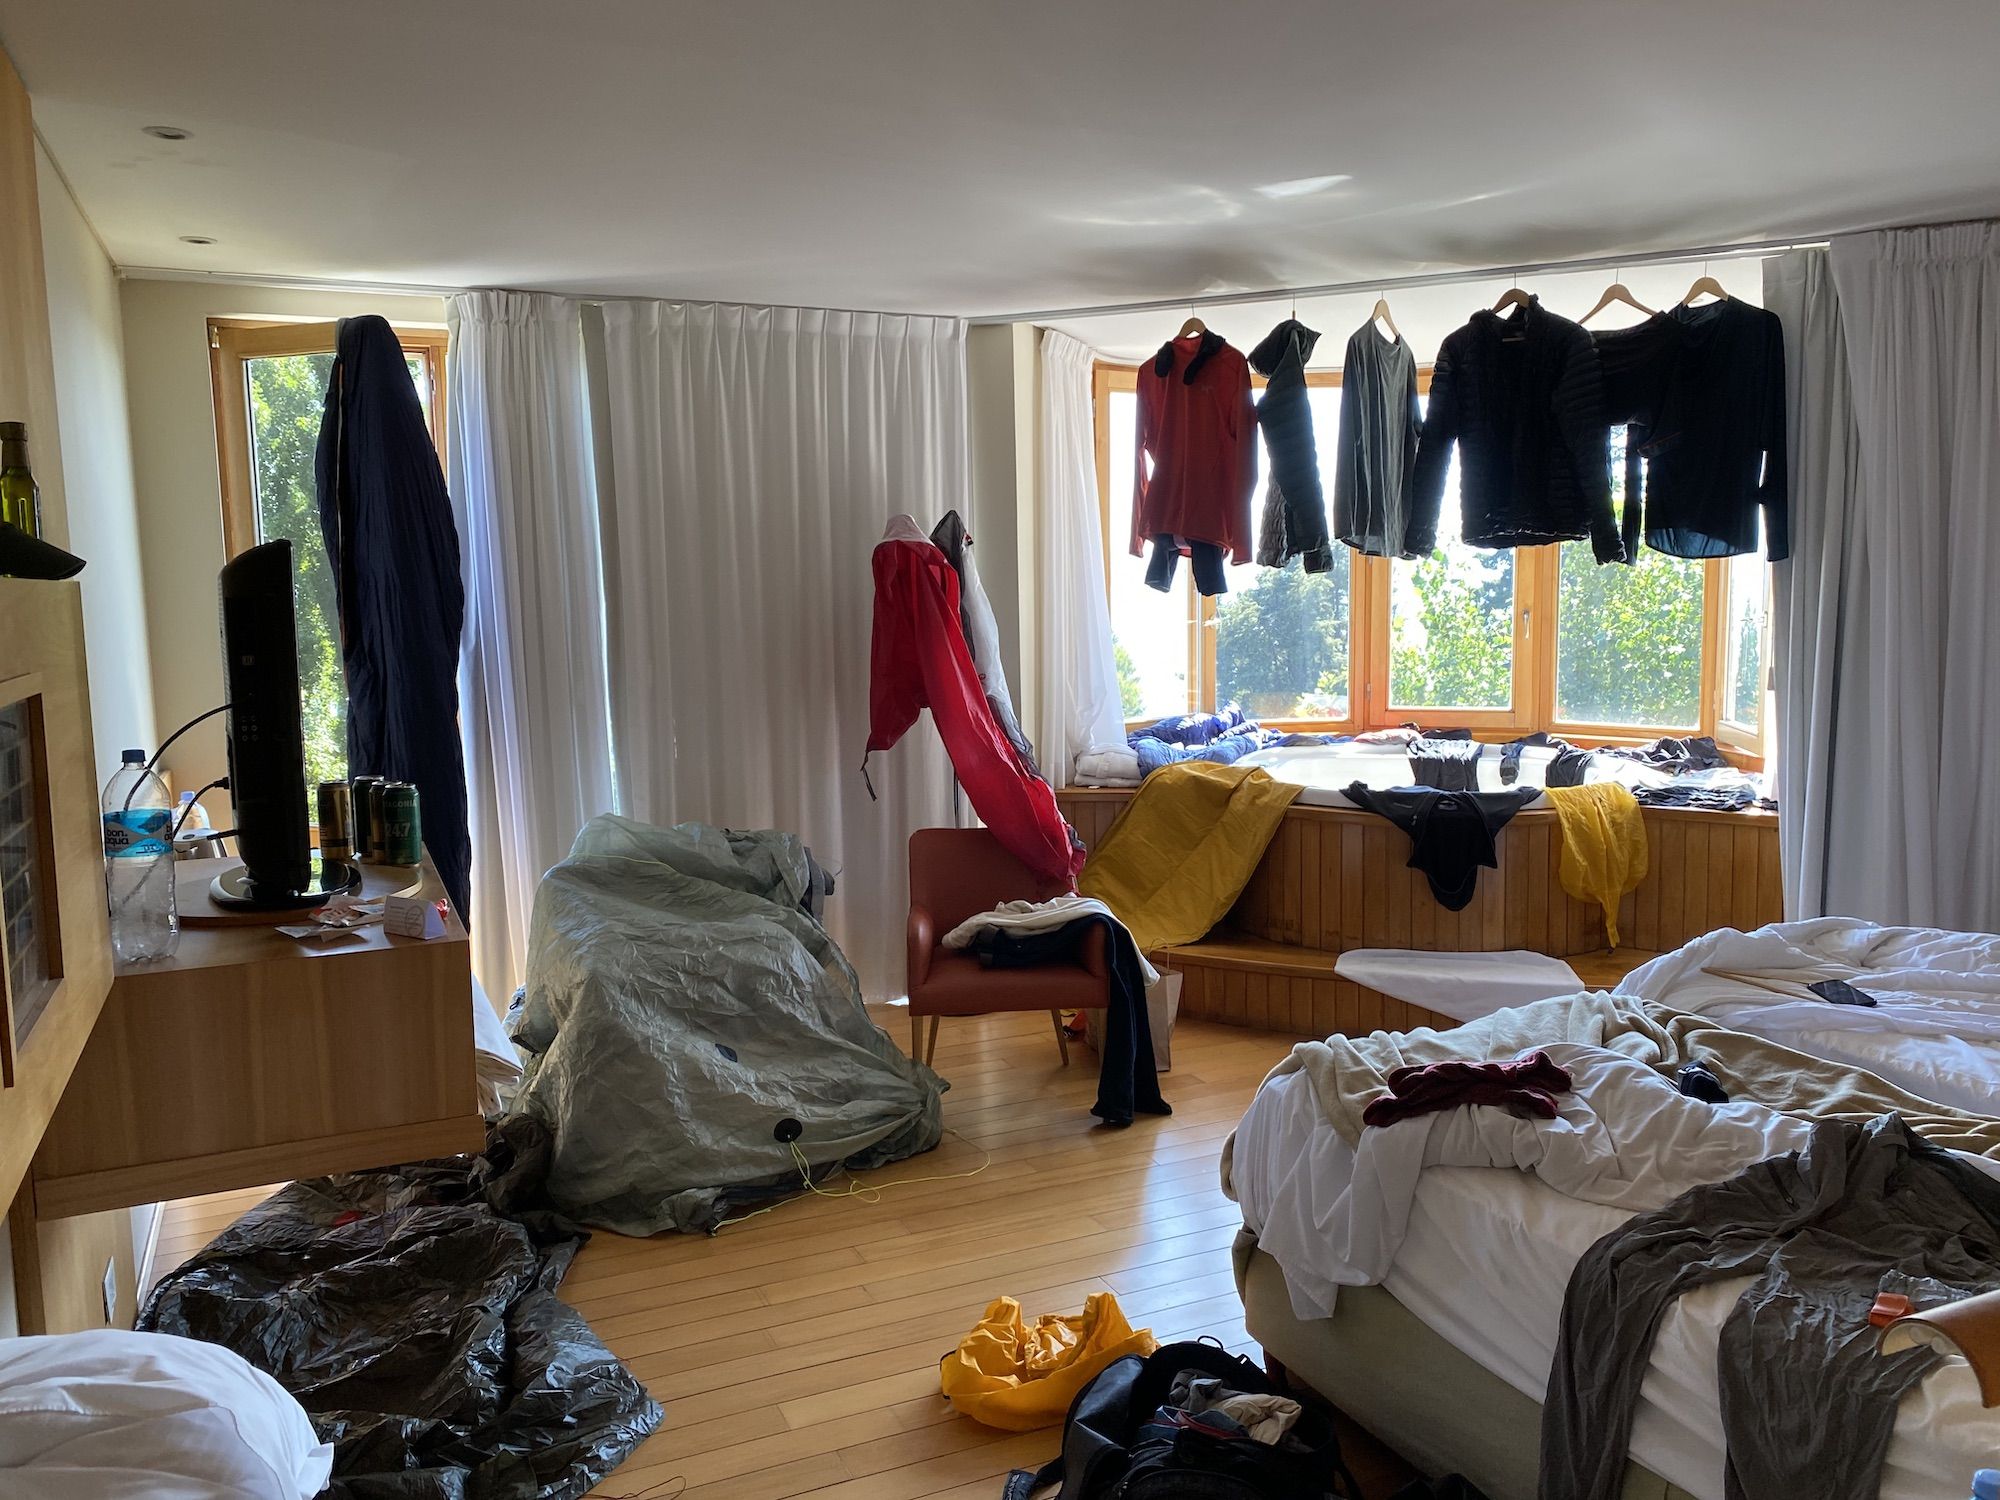 Clothes and gear spread around a hotel room to dry